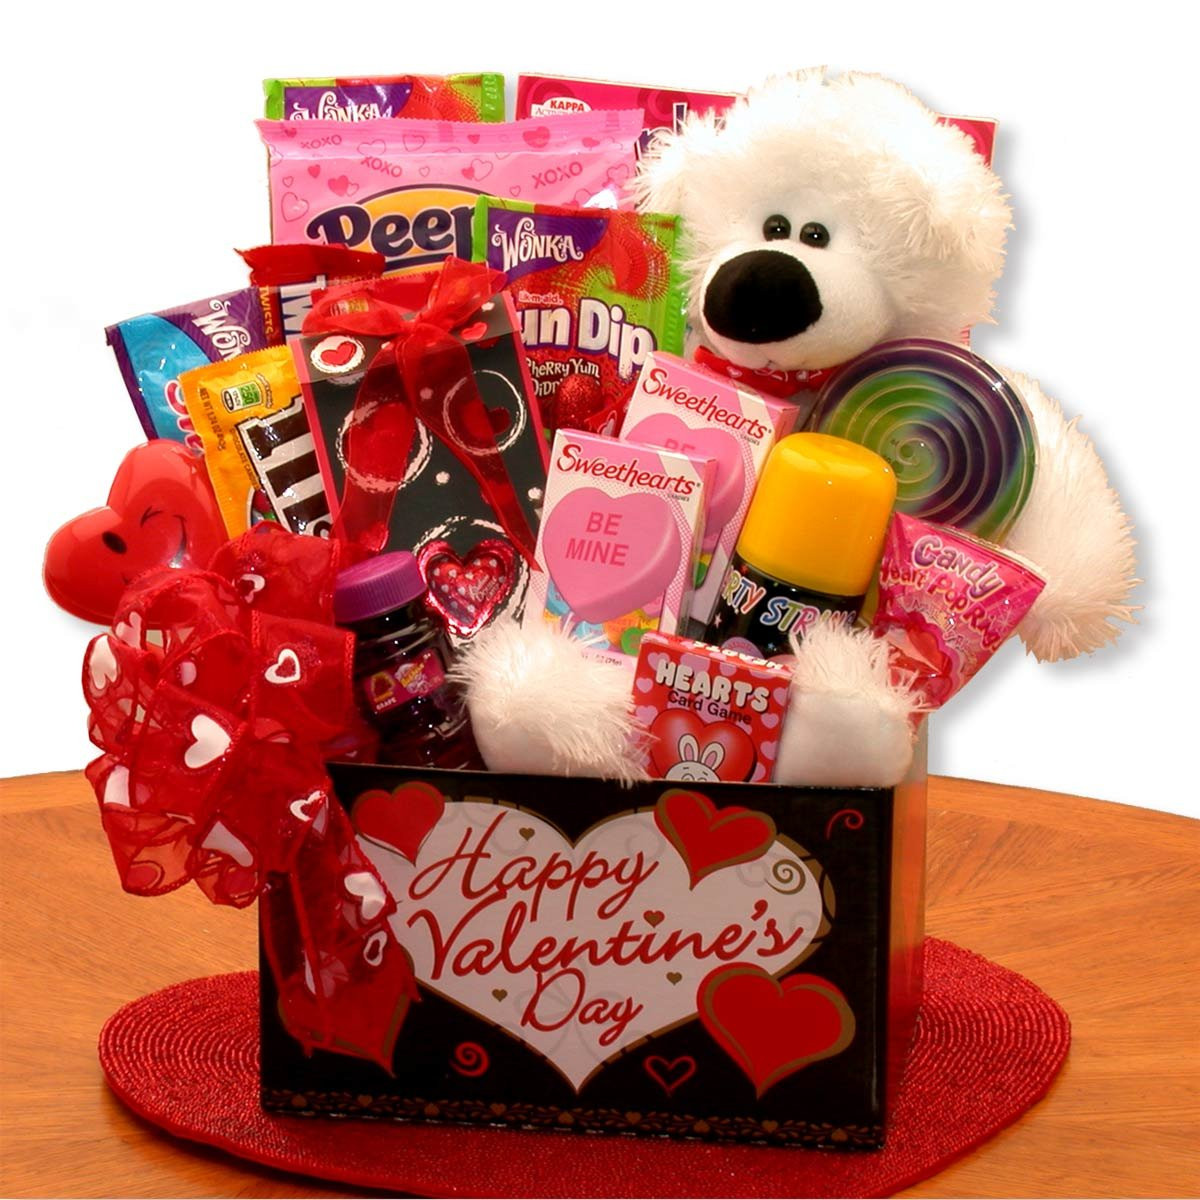 Valentine Gift For Her Ideas
 Cute His & Her Valentine Gift Ideas For Your Loved es